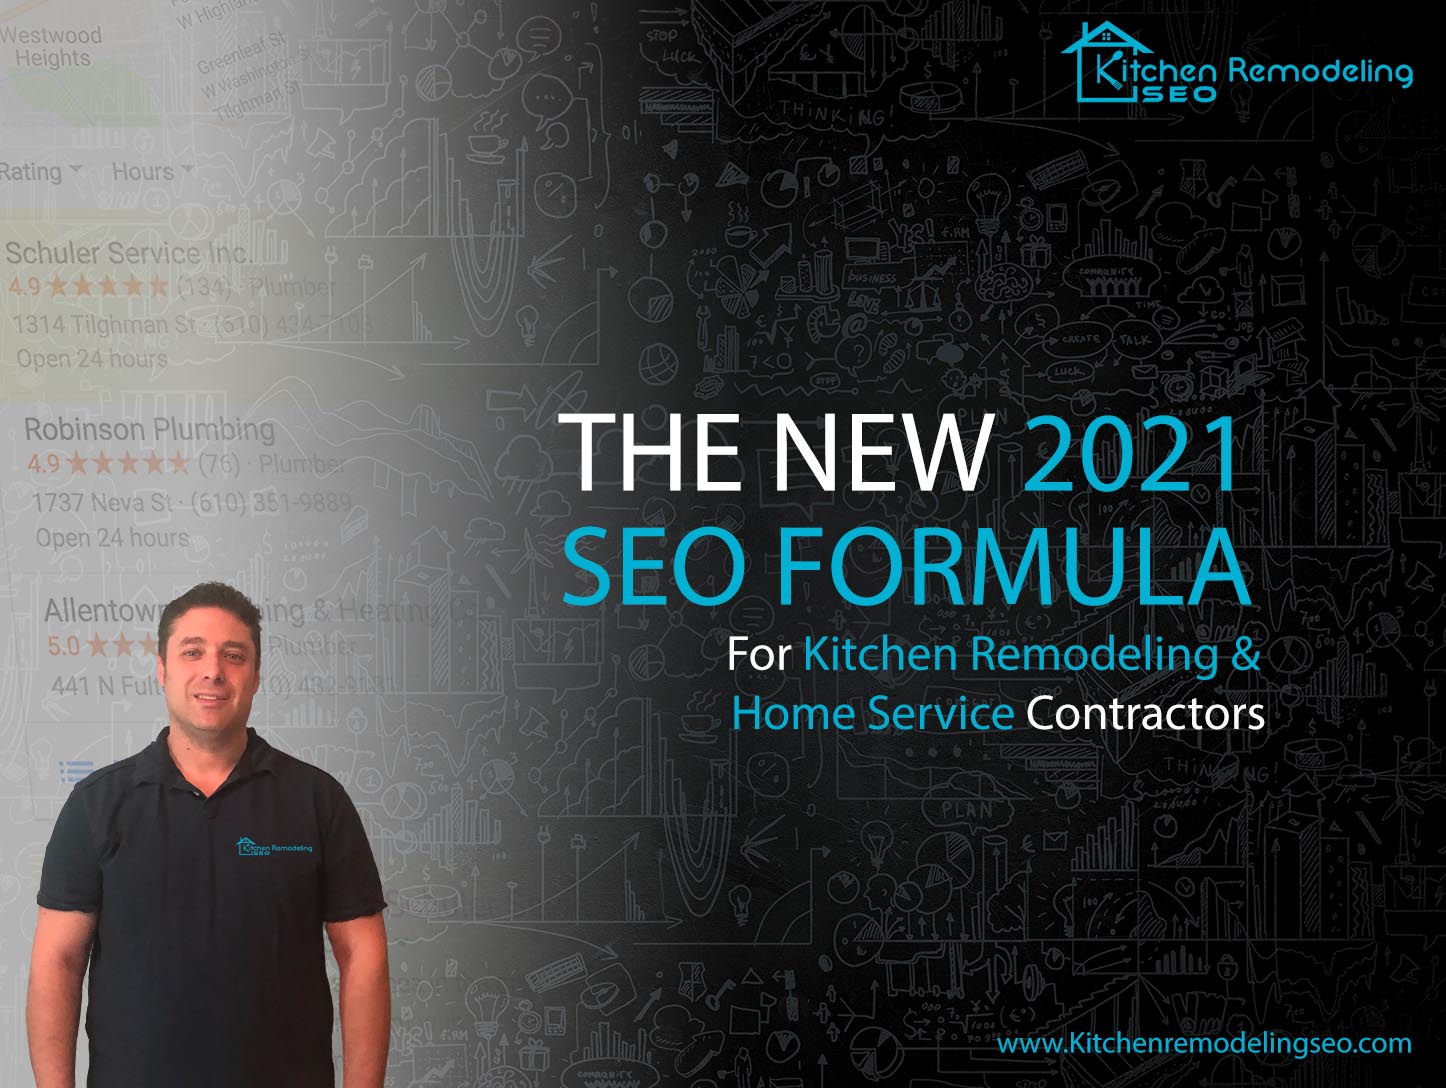 Kitchen Remodeling SEO Approved to Offer Search Engine Marketing Classes for CU Credits to KNBA Members - Digital Journal